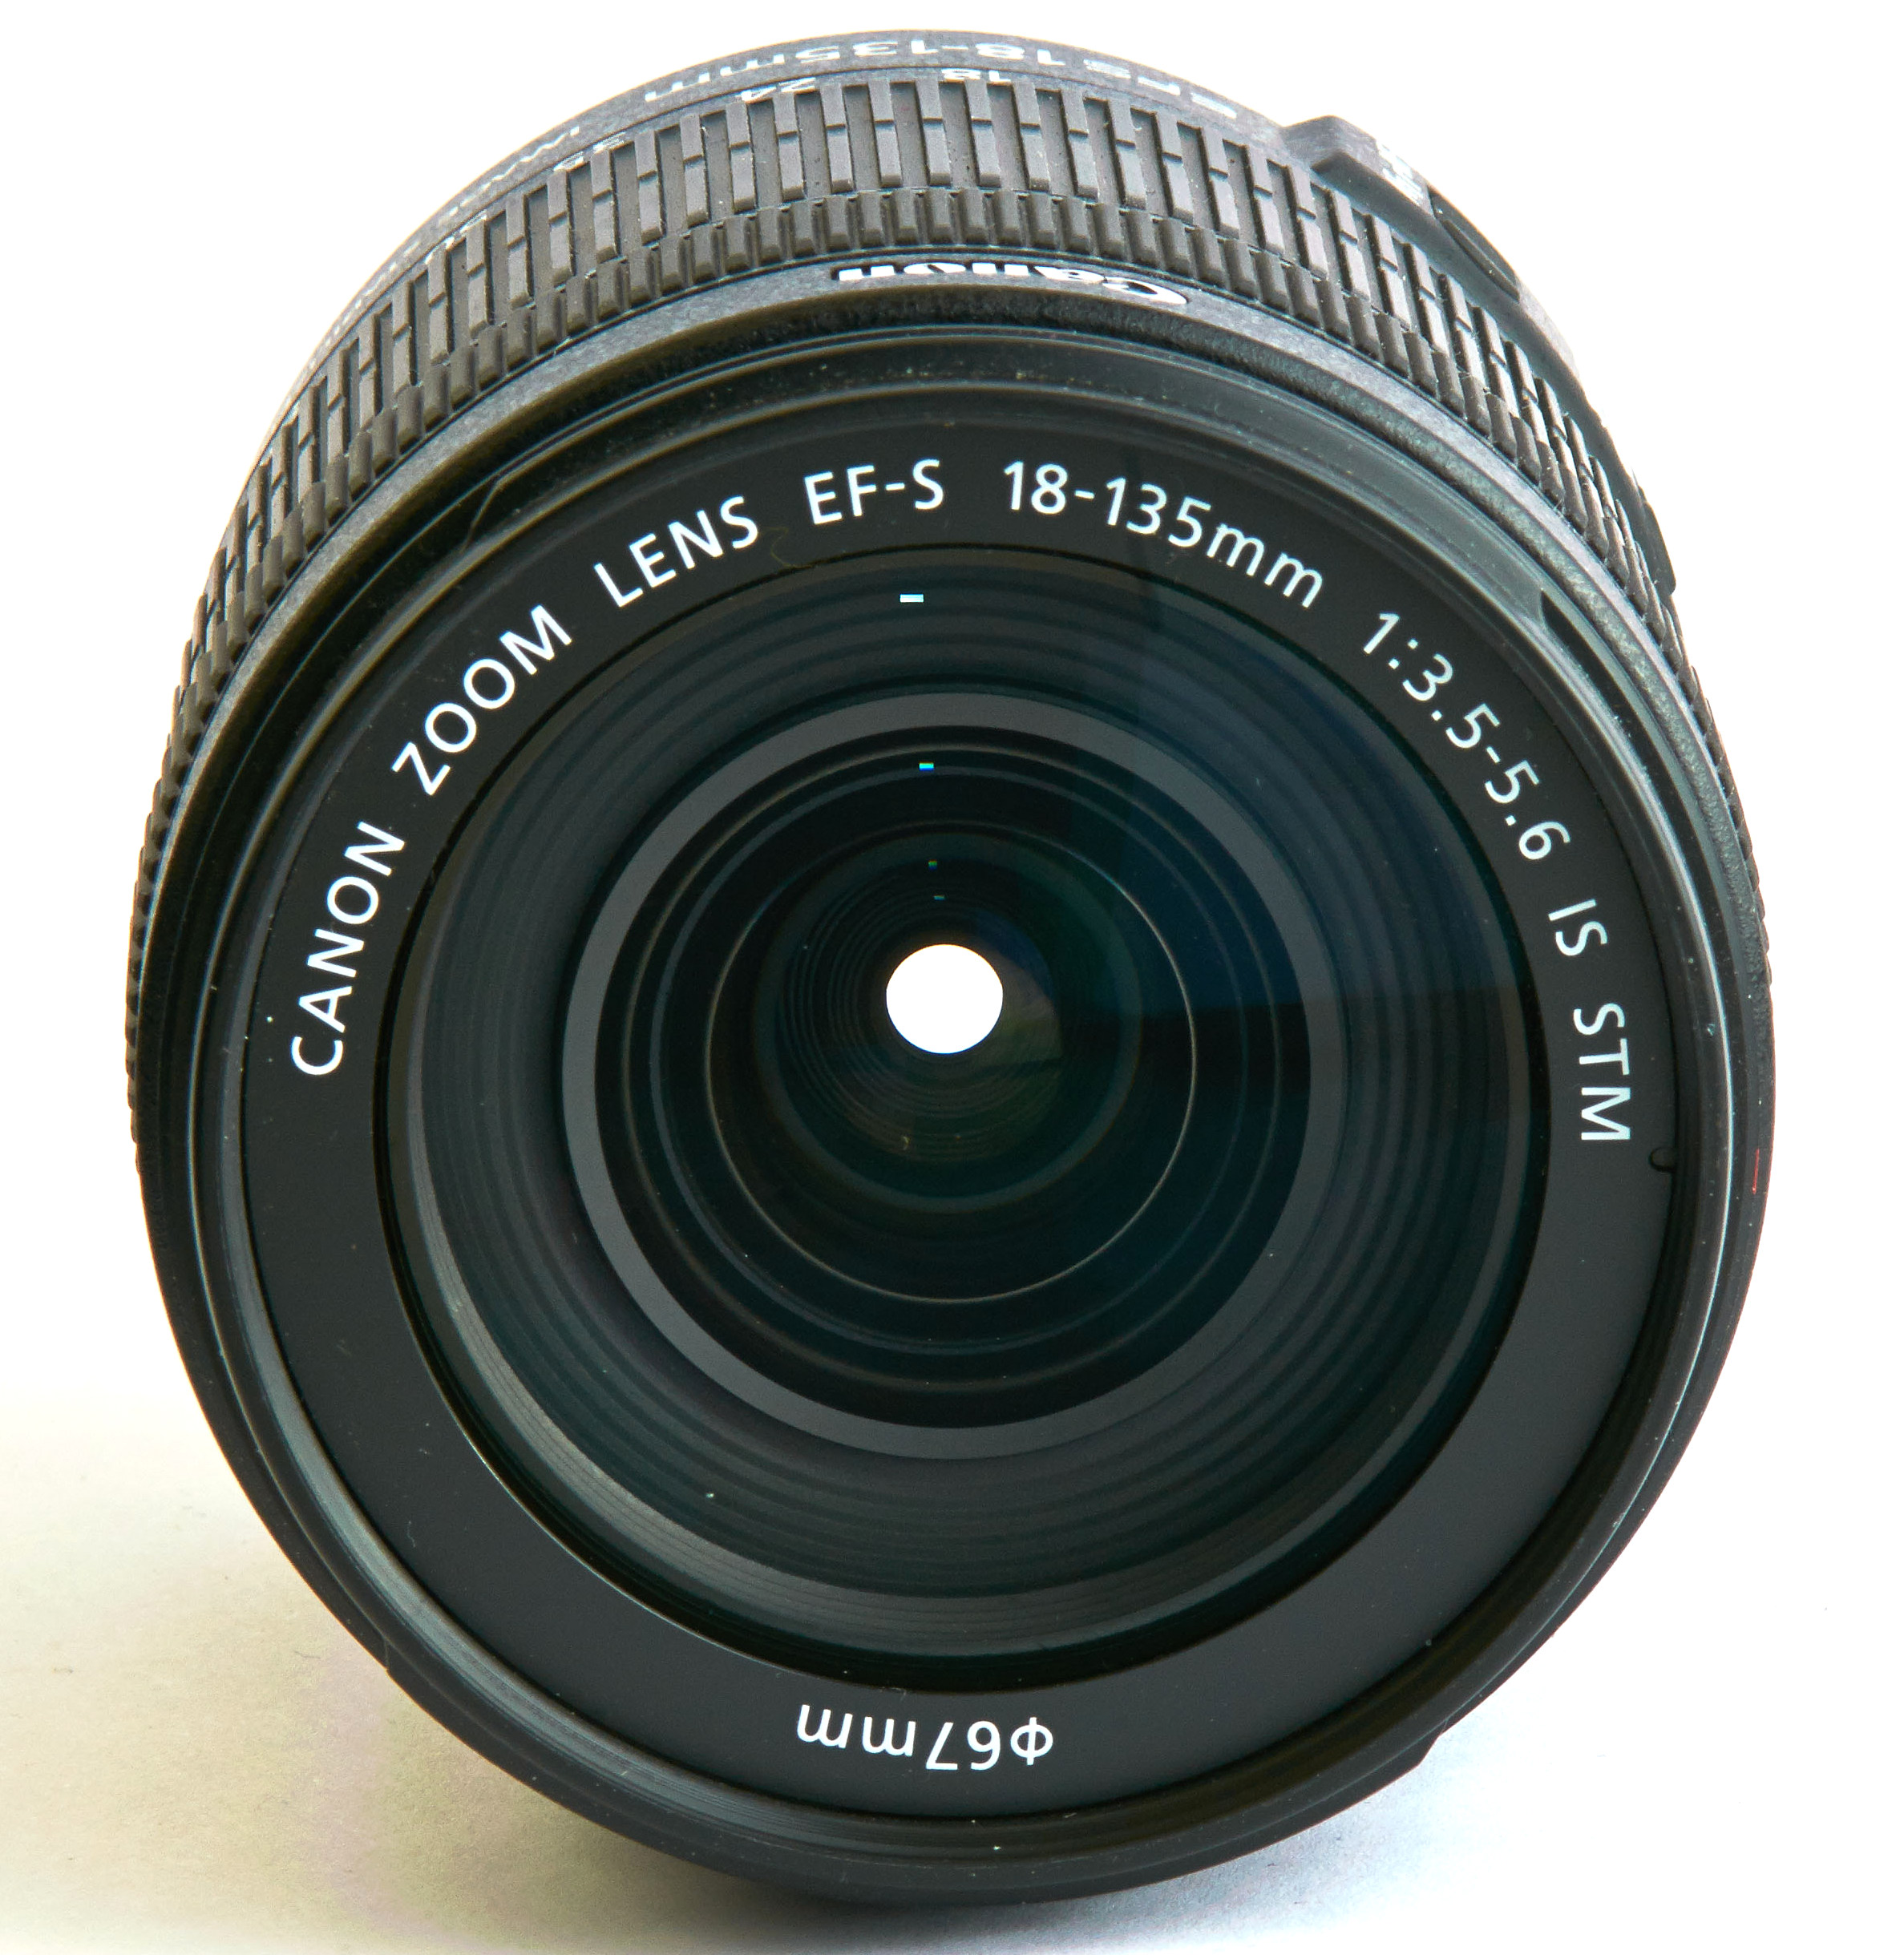 Canon EF-S 18-135mm f/3.5-5.6 IS STM Lens Review